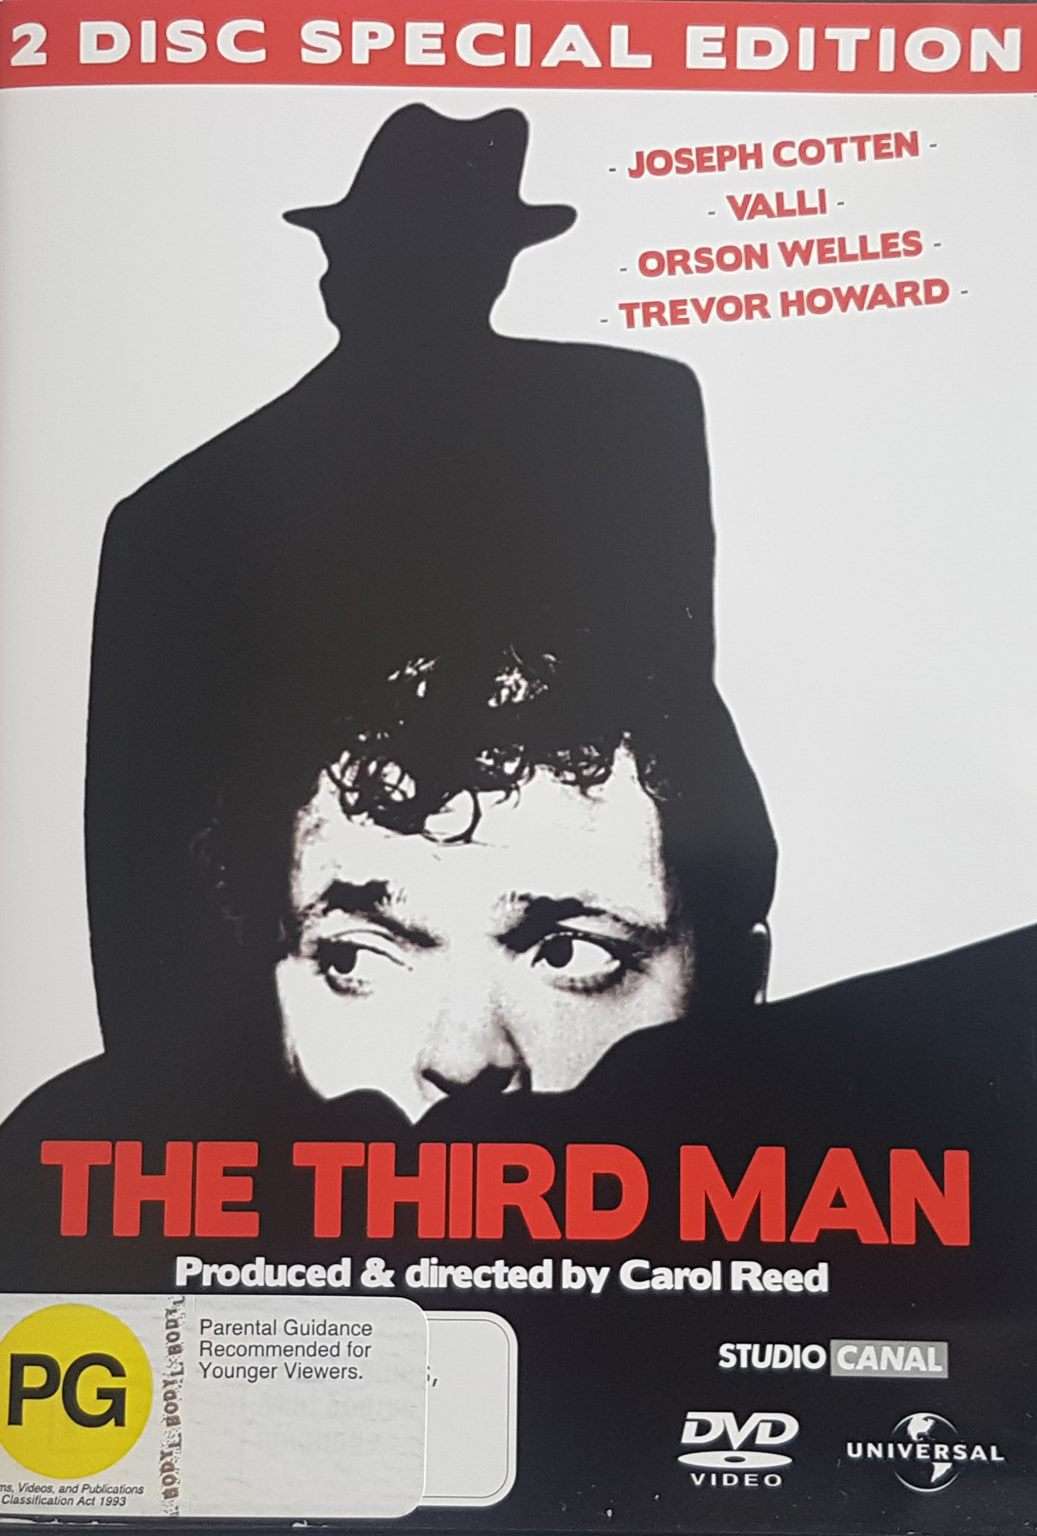 The Third Man 2 Disc Special Edition